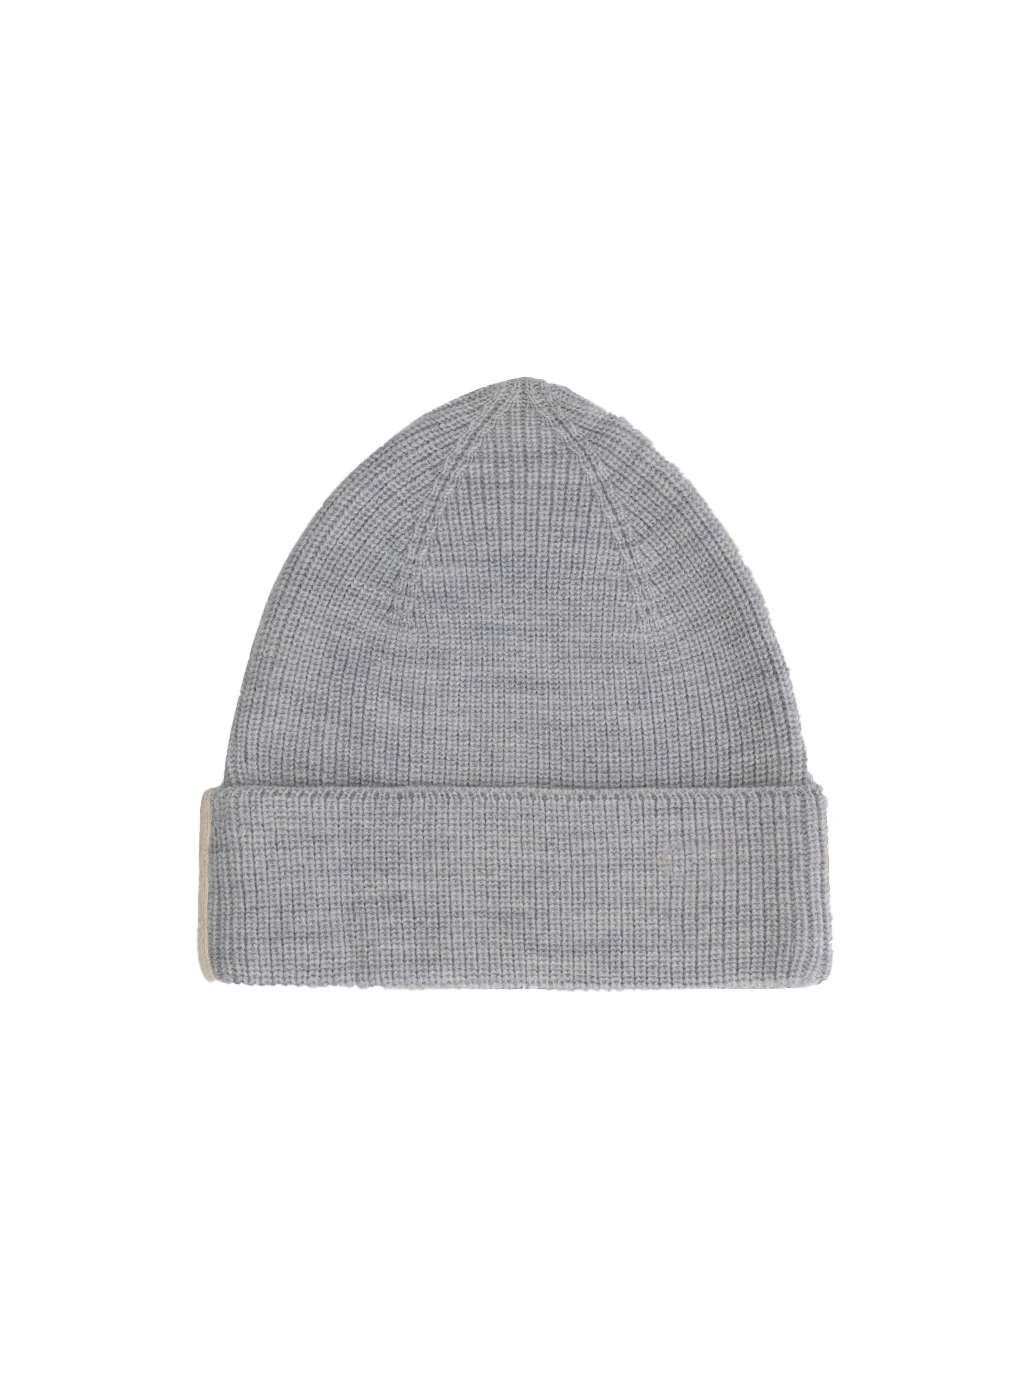 Baby knitted beanie